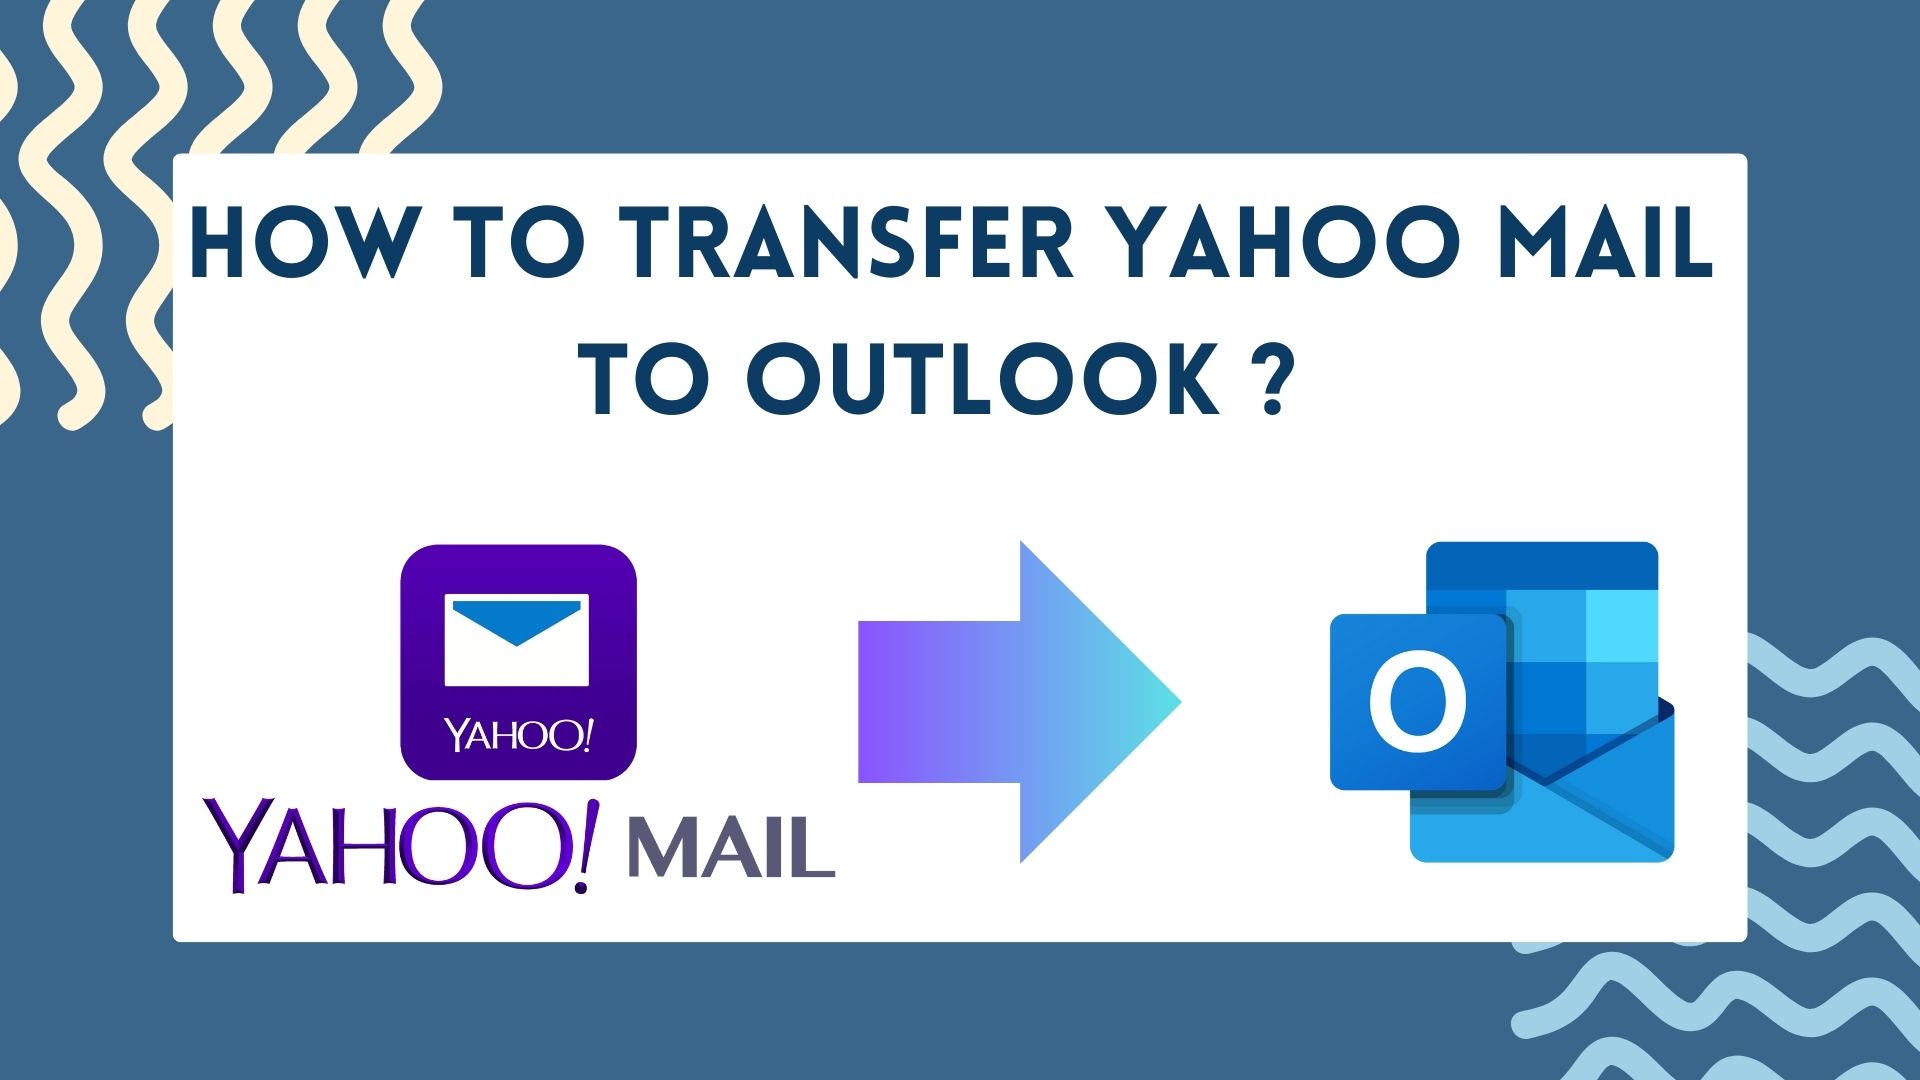 Transfer Yahoo mail to Outlook